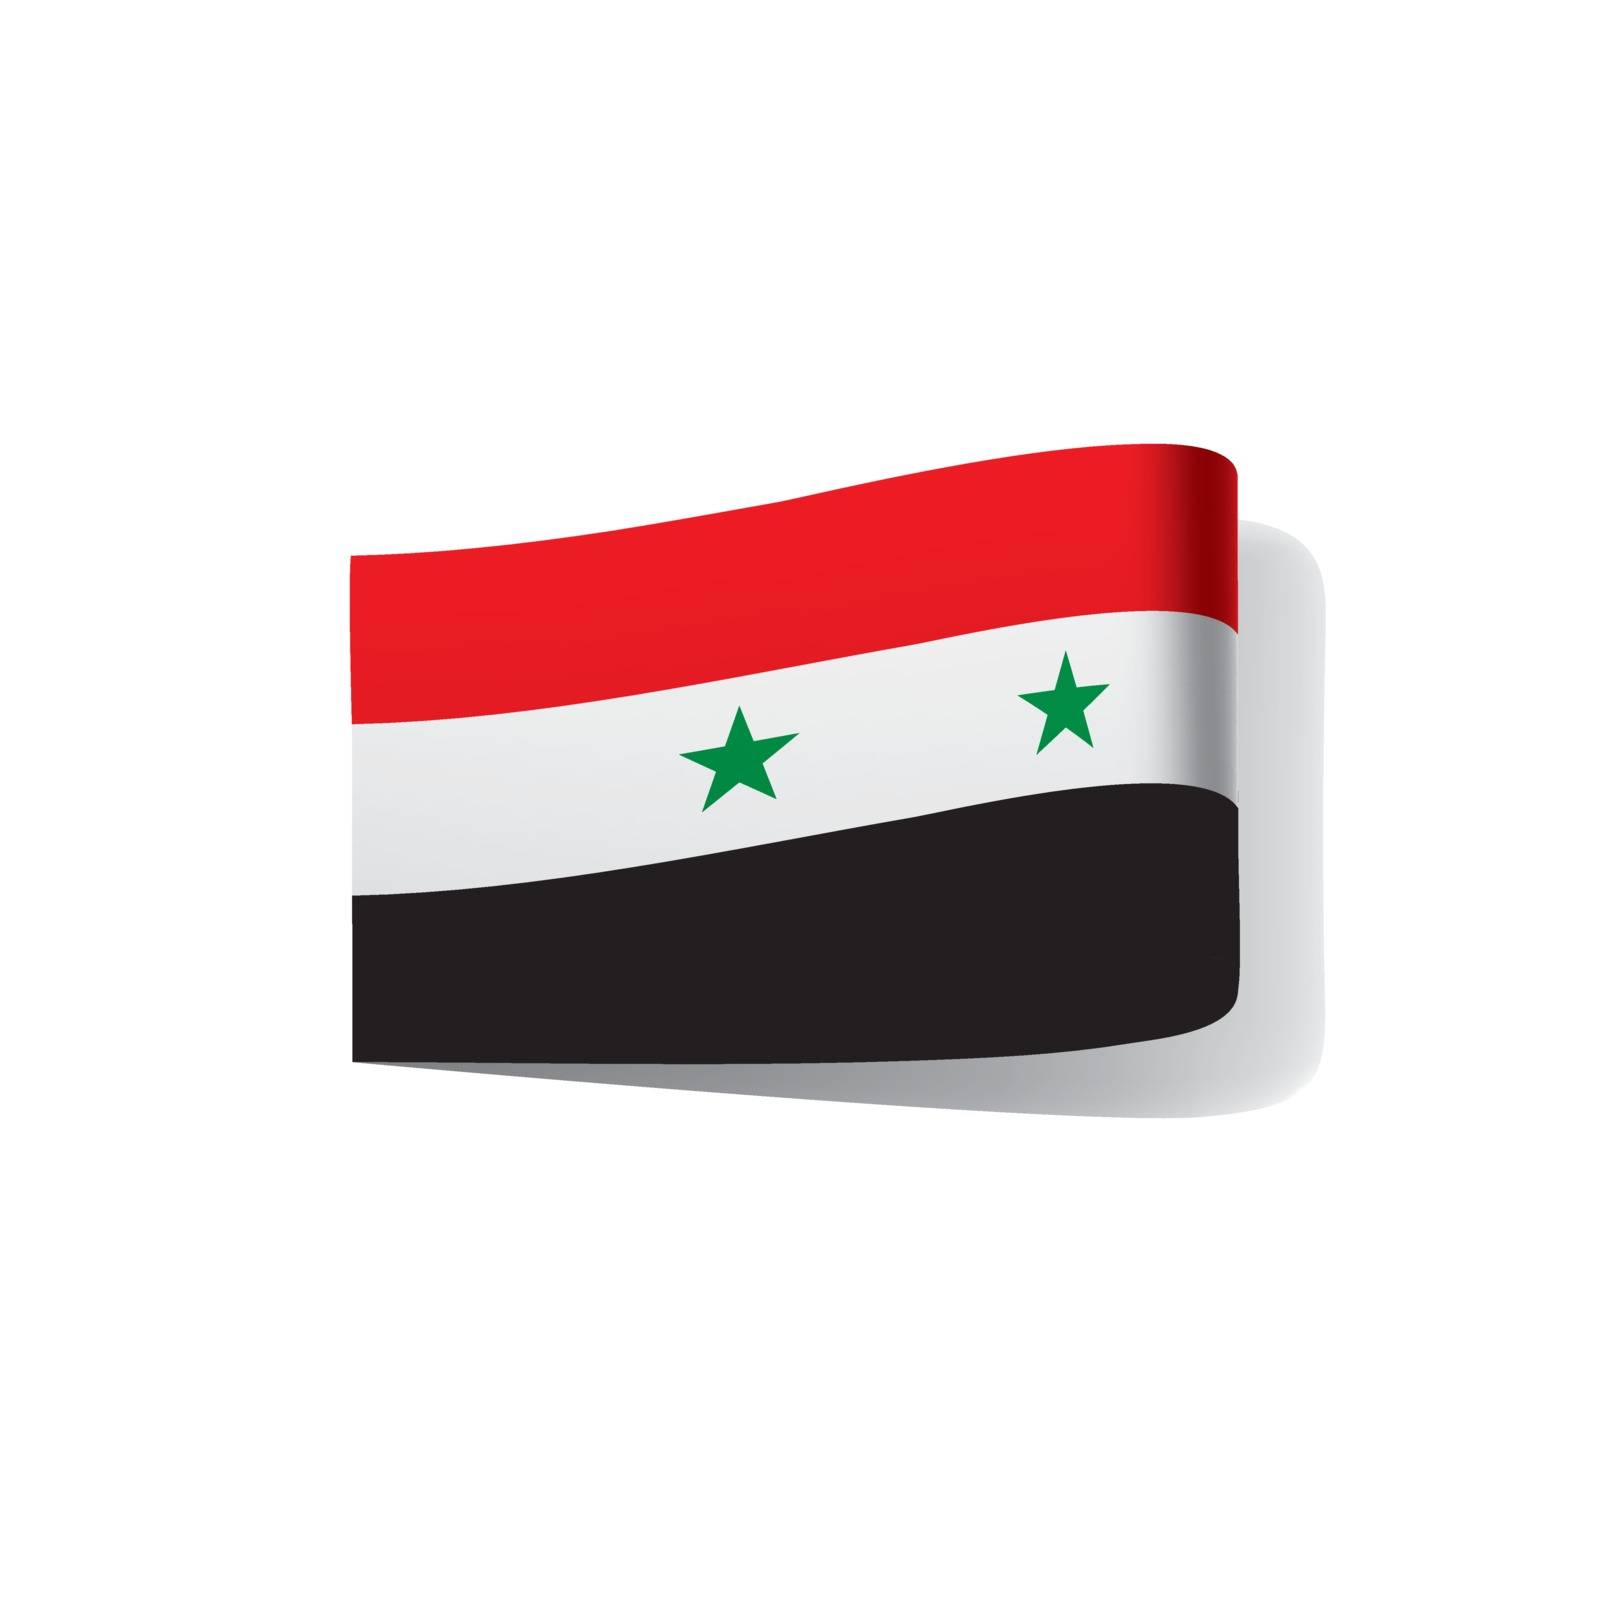 Syria flag, vector illustration by butenkow